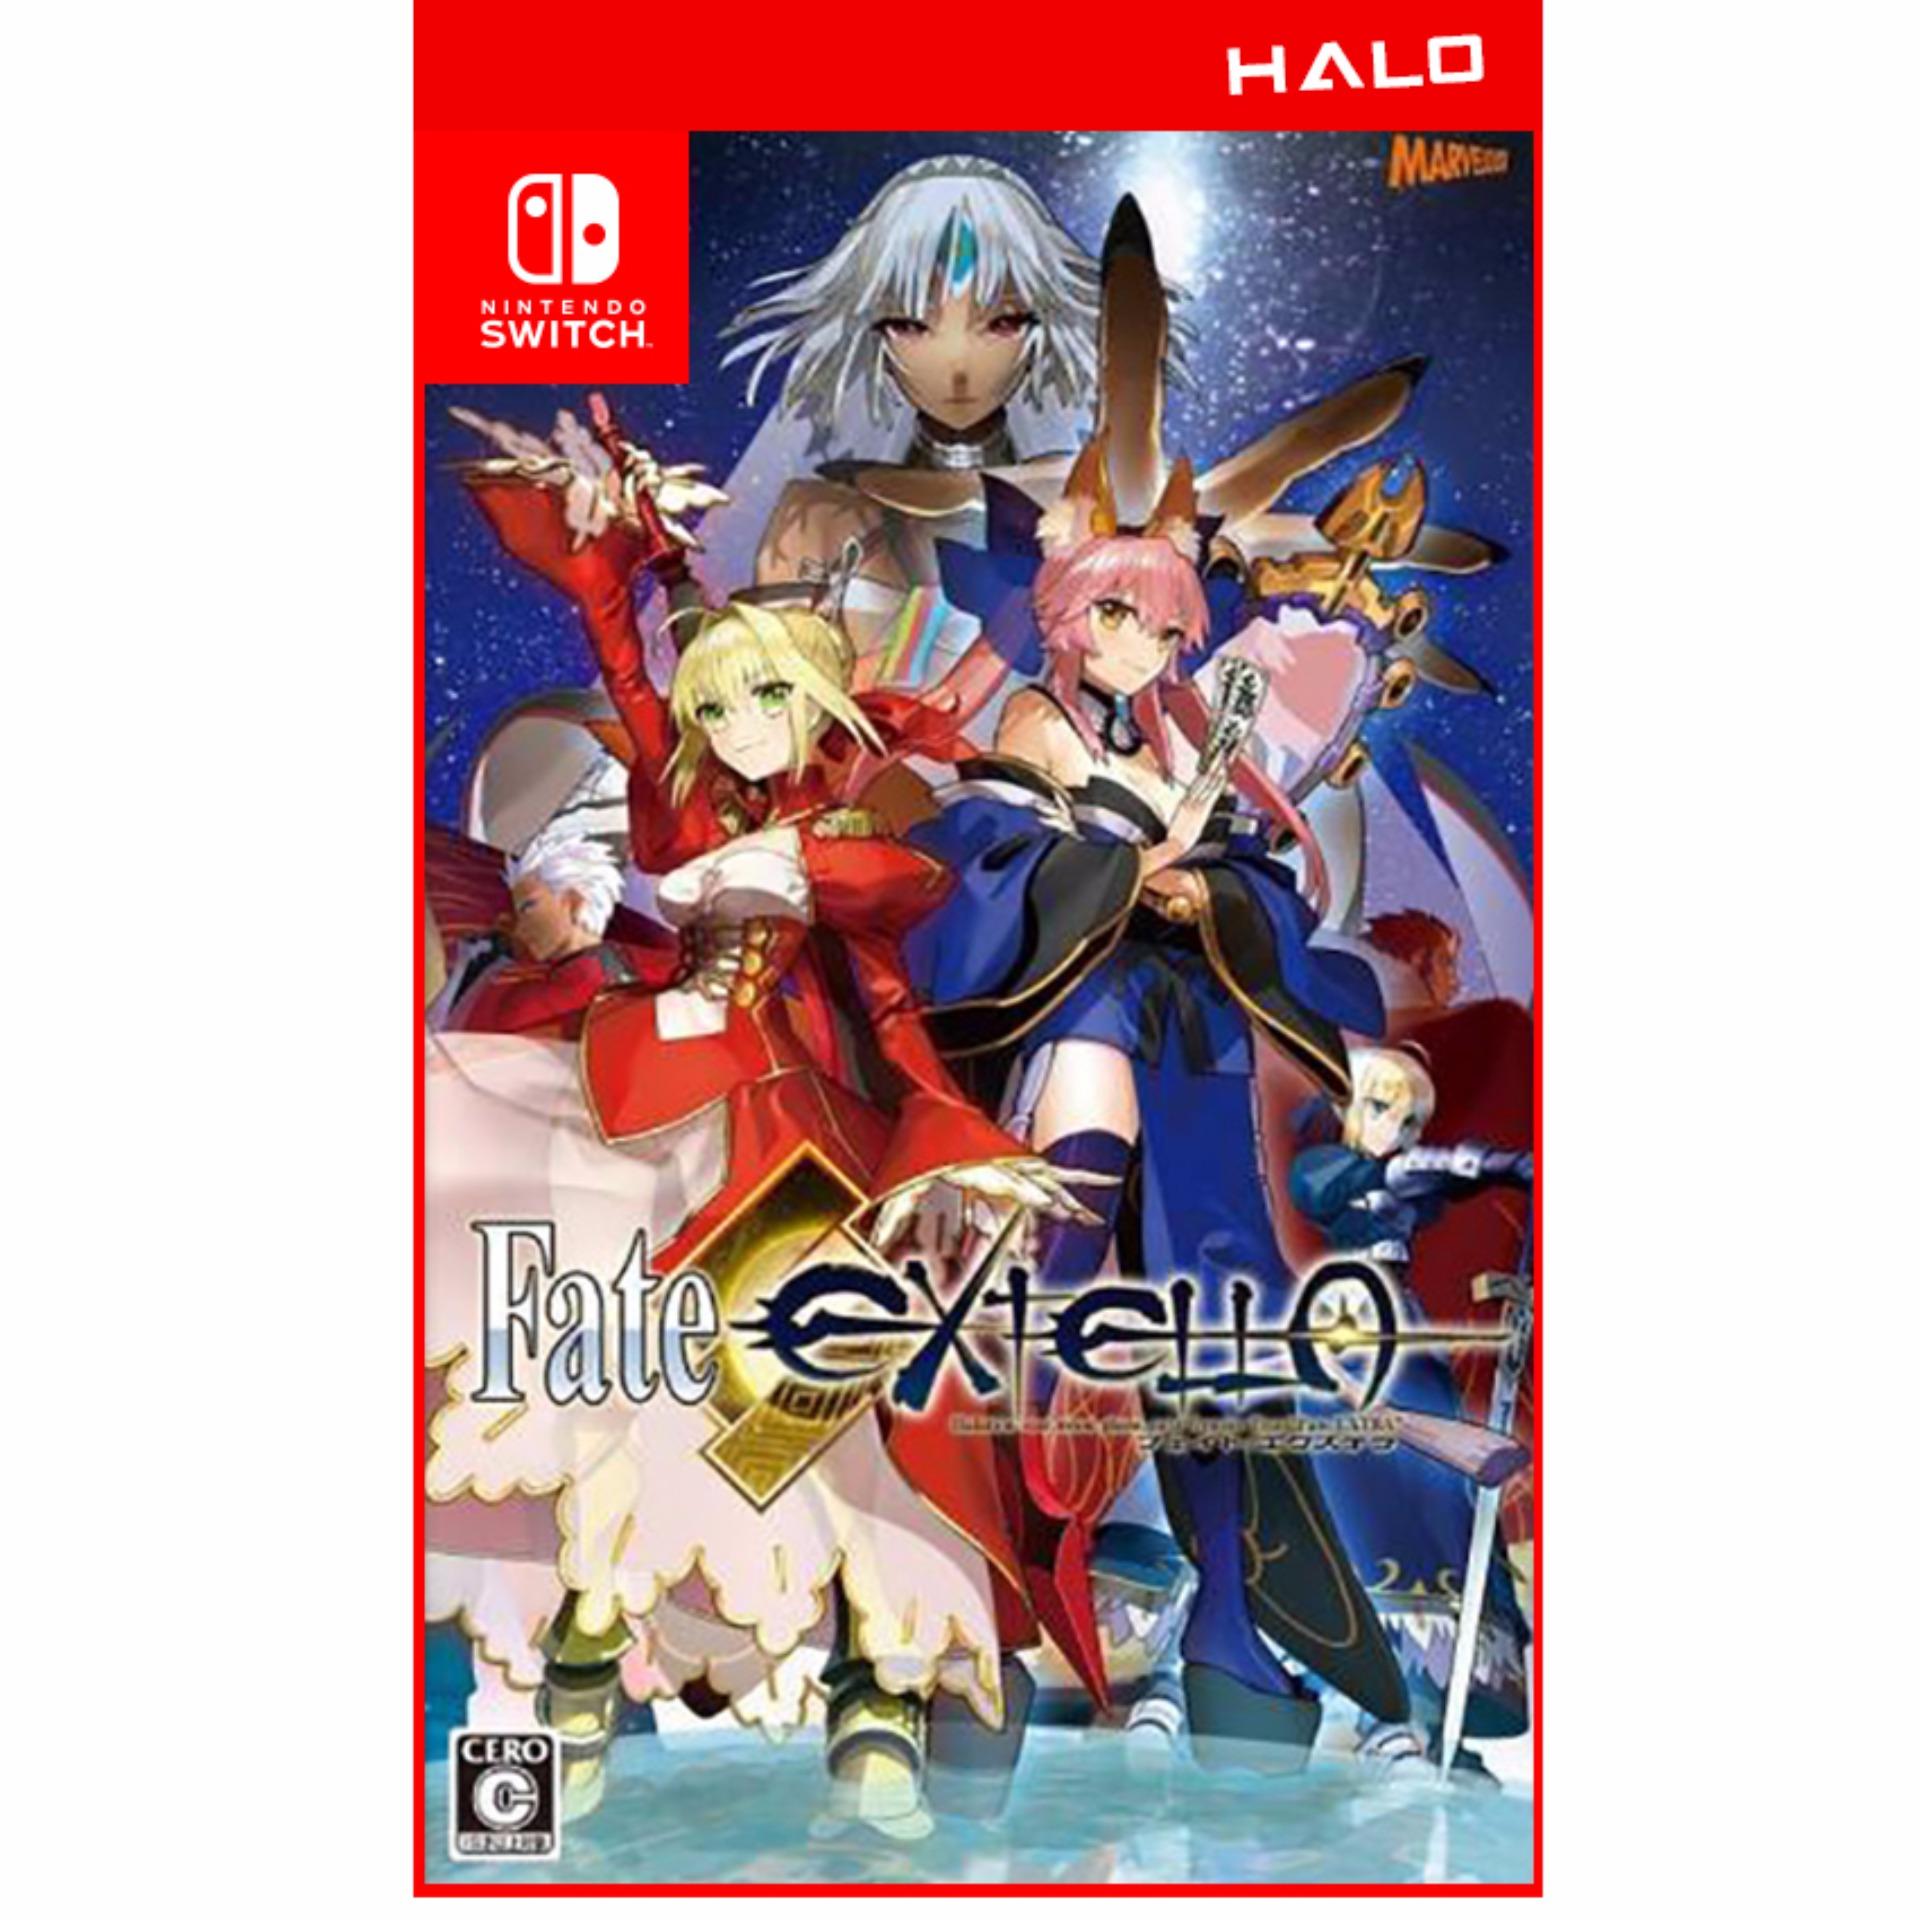 Đĩa Game Nintendo Switch Fate/Extella: The Umbral Star - ẸNG/ASIA